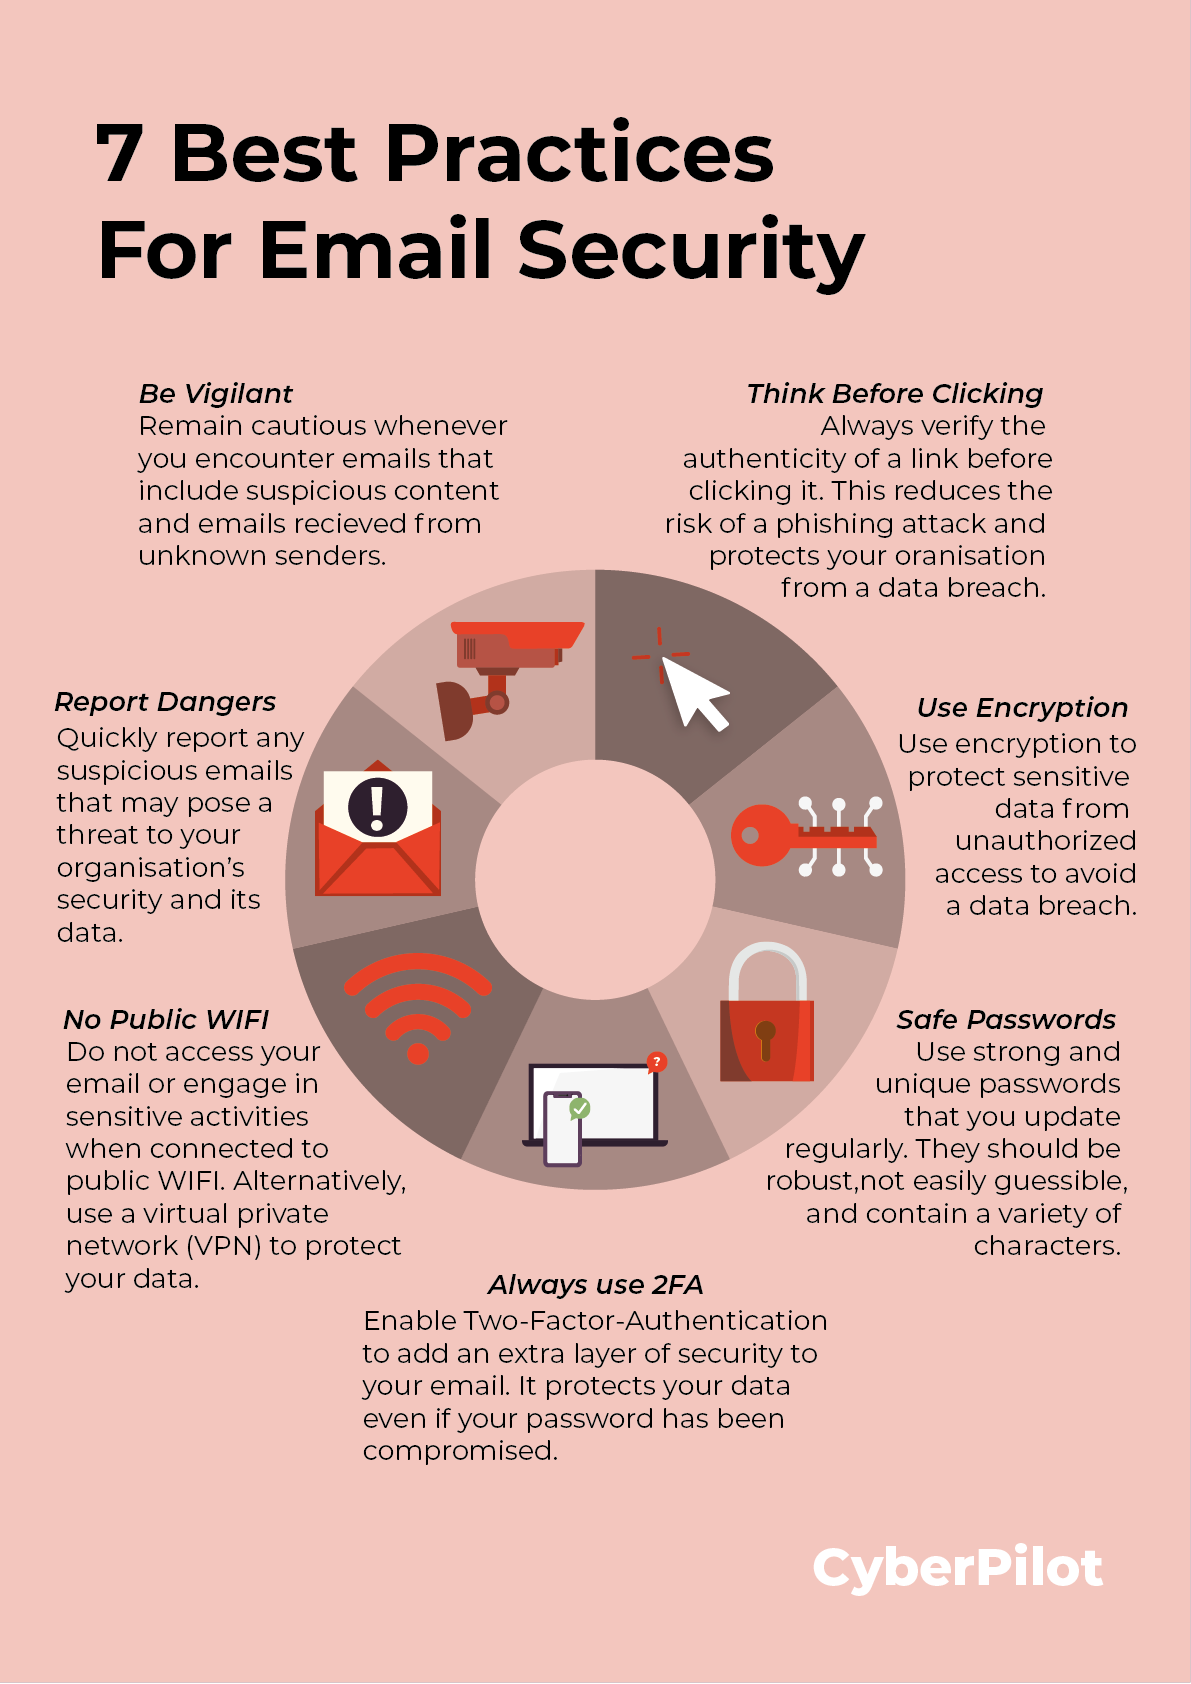 7 best practices for email security